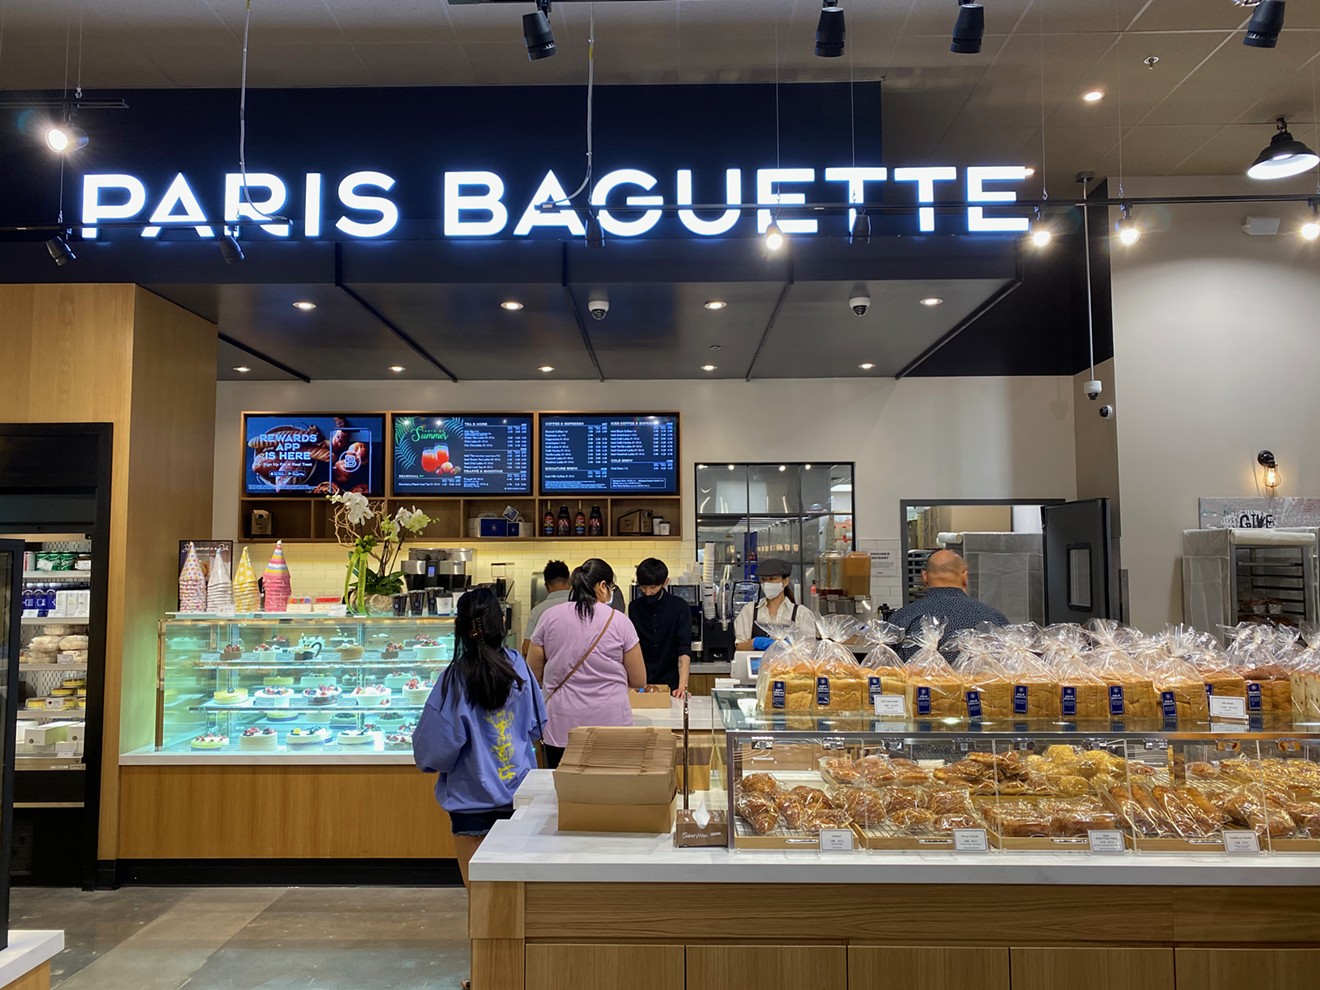 Paris Baguette has a location inside H Mart's food hall. The new bakery will open on Central Avenue in Phoenix.